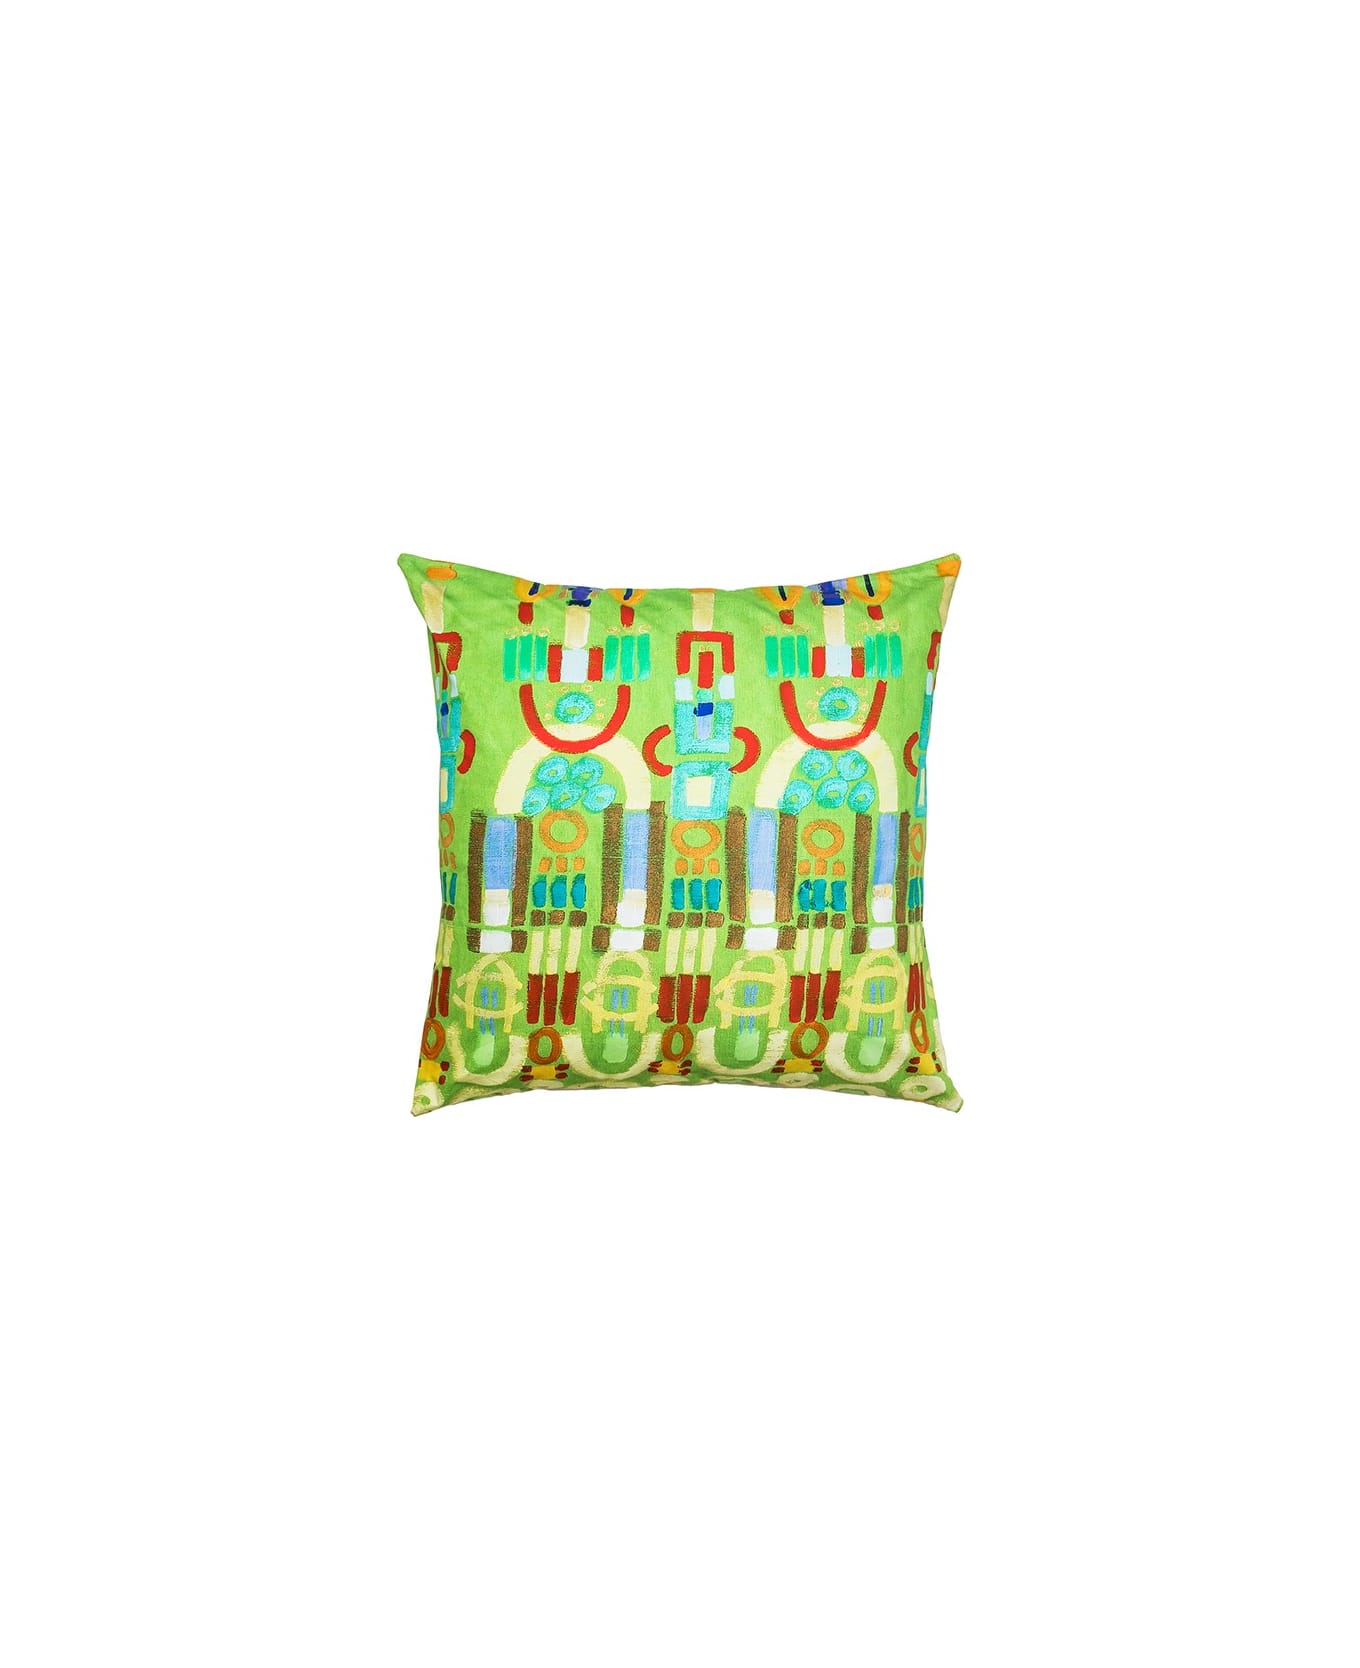 Le Botteghe su Gologone Printed Cushions 40x40 Cm - Lime Green クッション